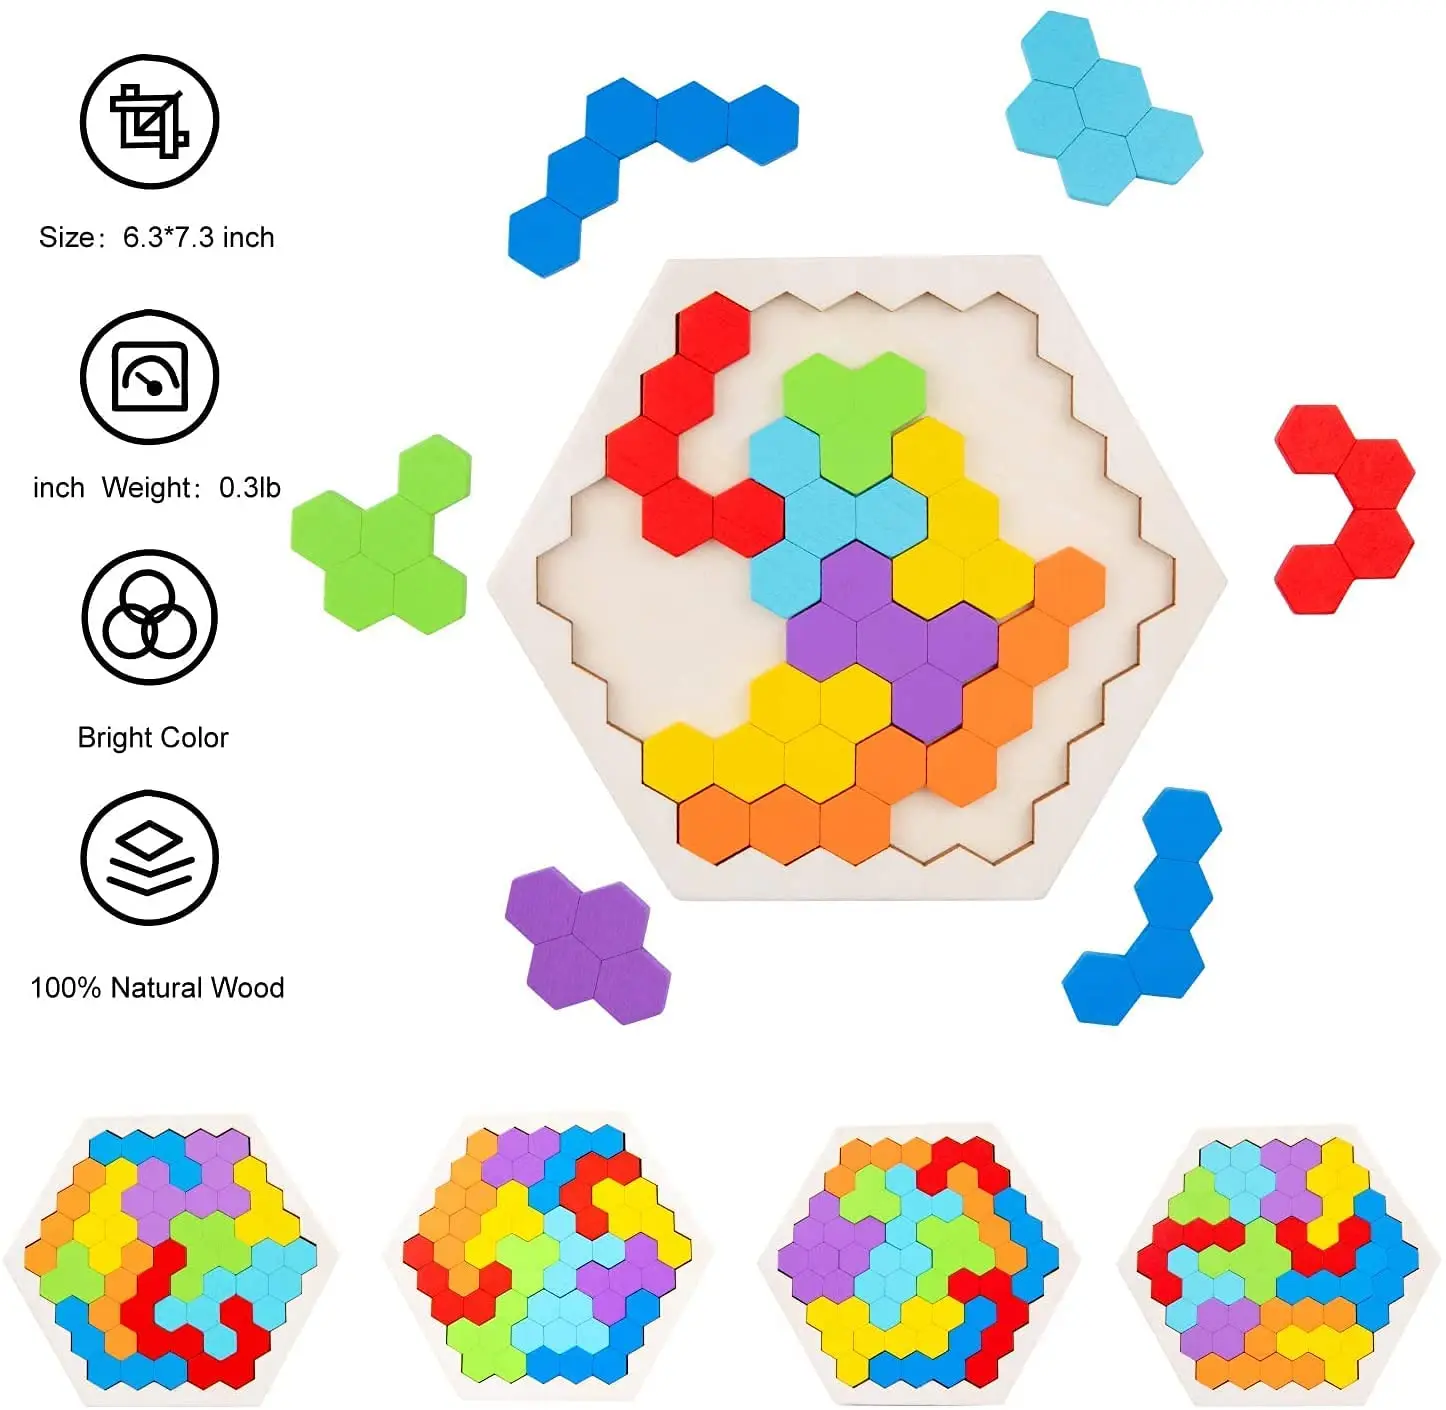  Wooden Puzzles for Kids Adults - Kids Puzzles Hexagon